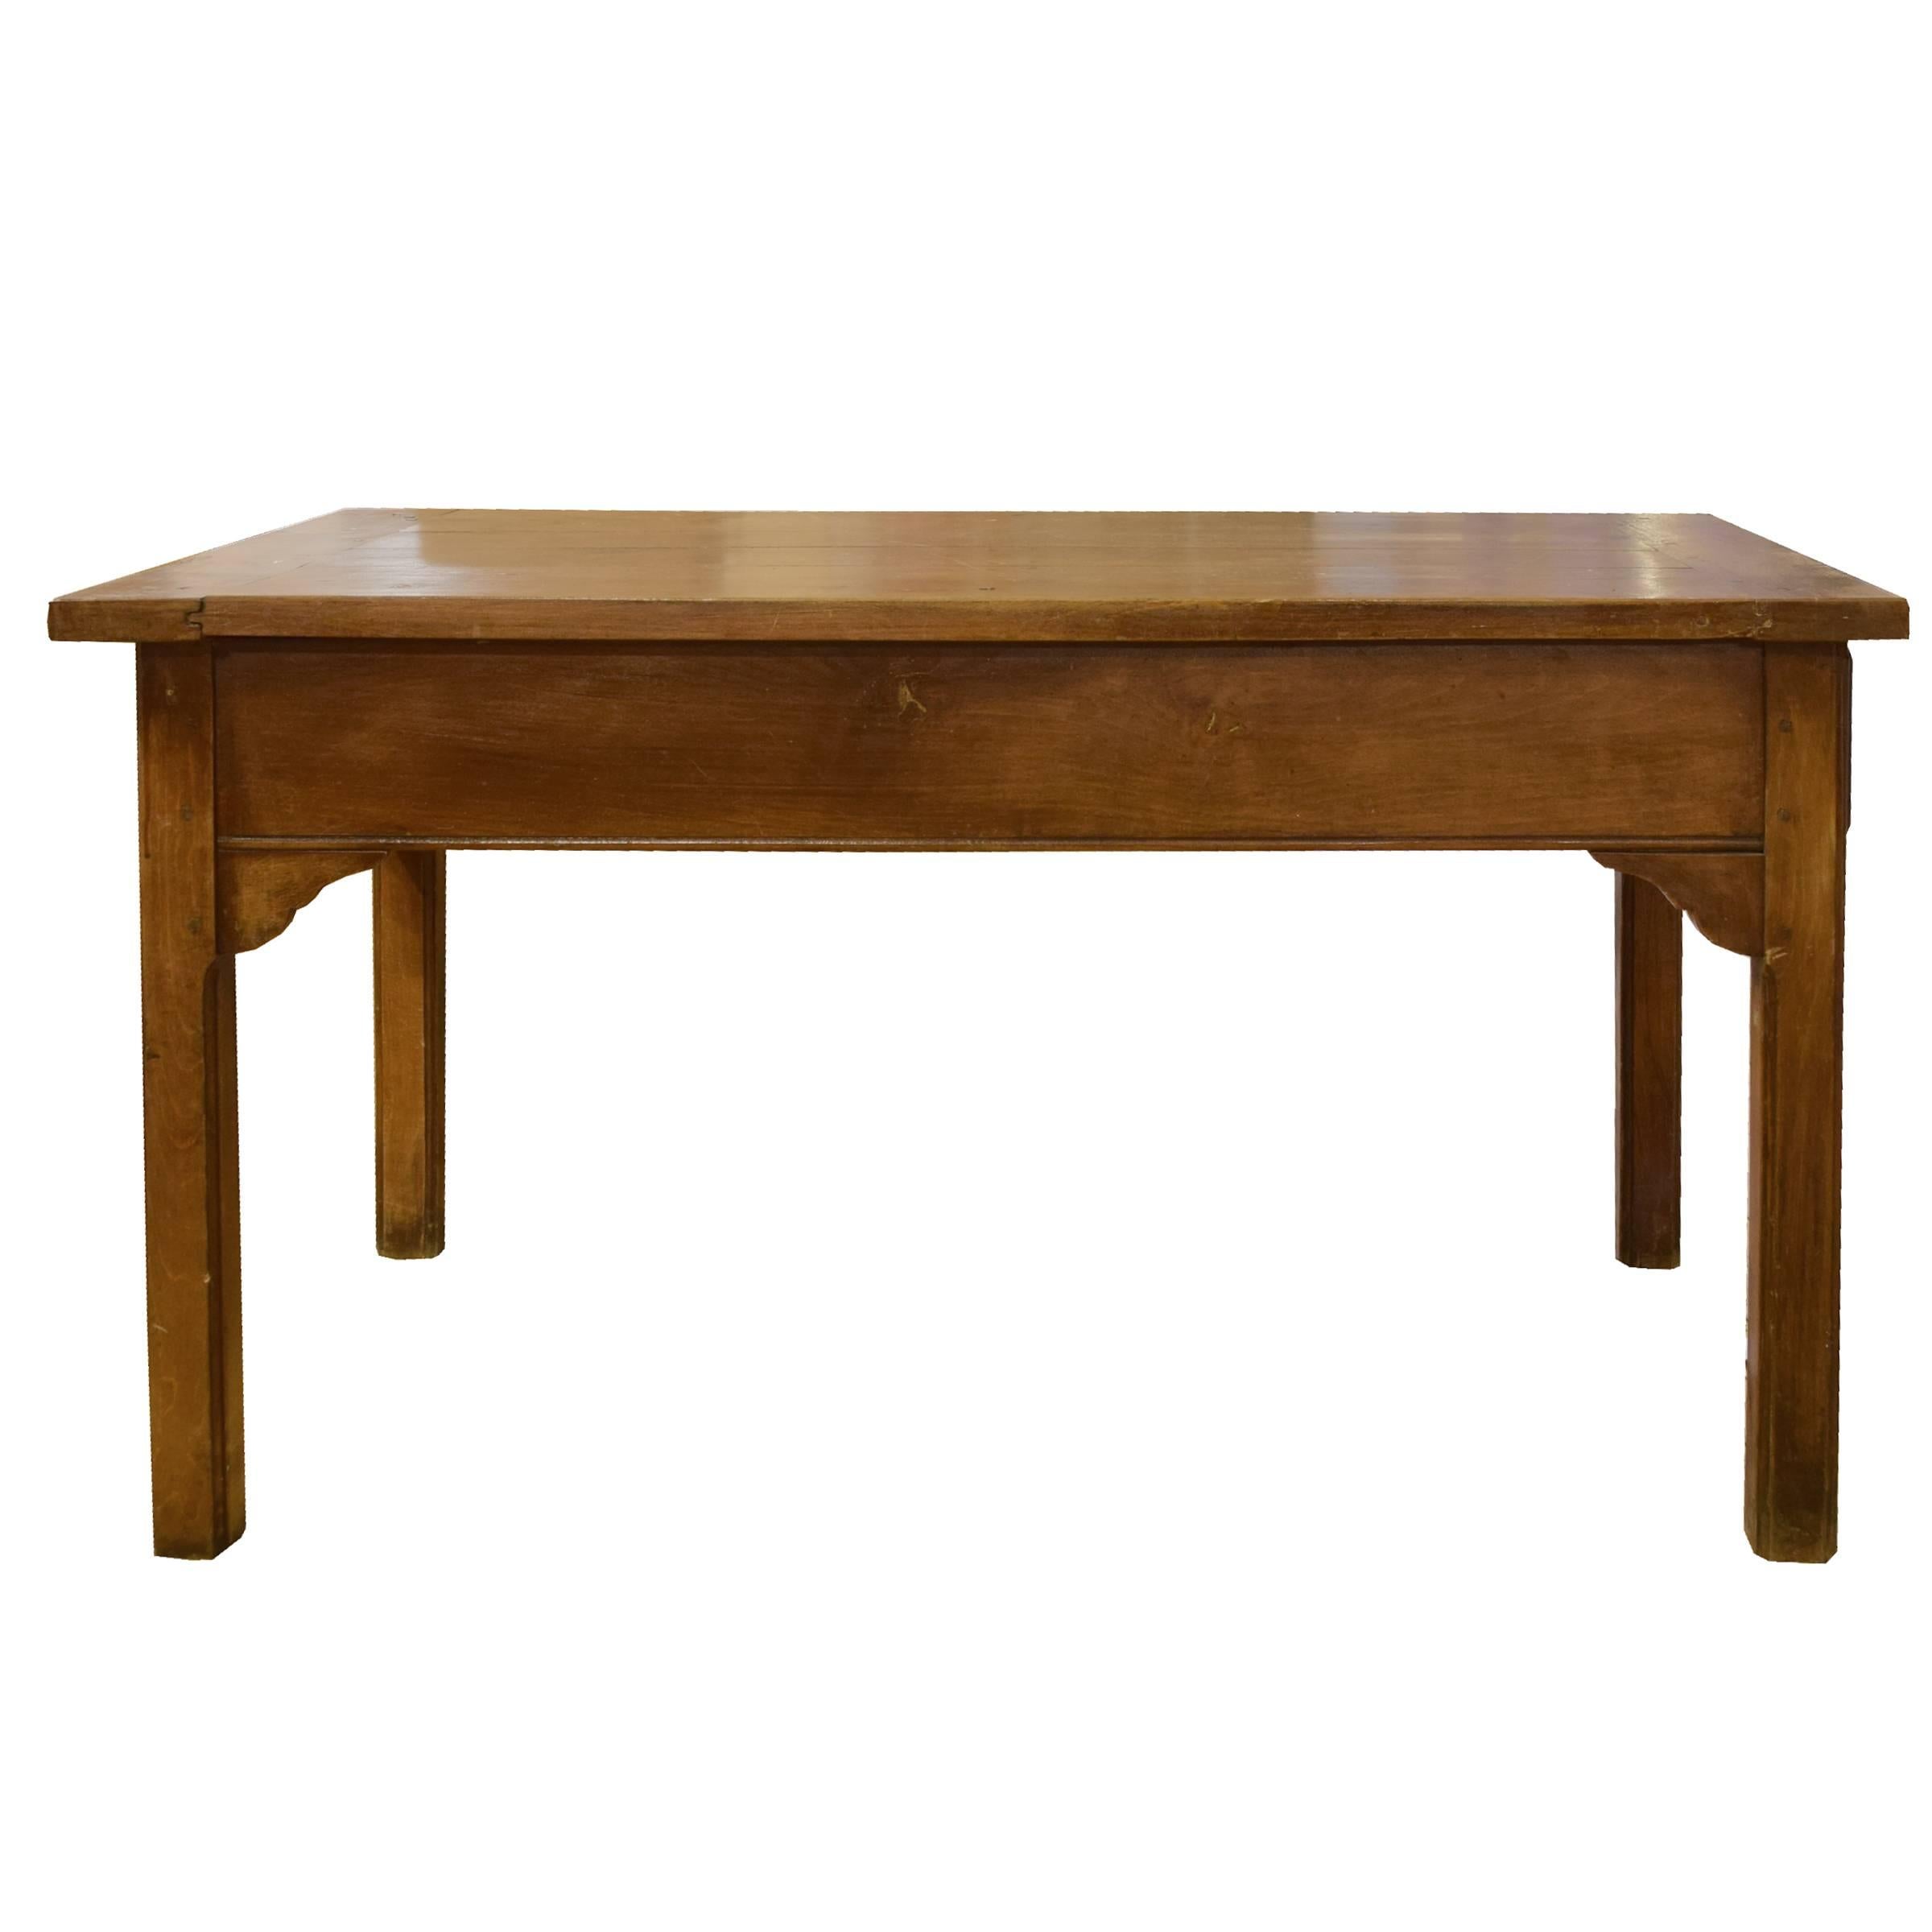 A 19th century, French walnut baker’s table with one drawer, square legs and a scroll carved apron.
  